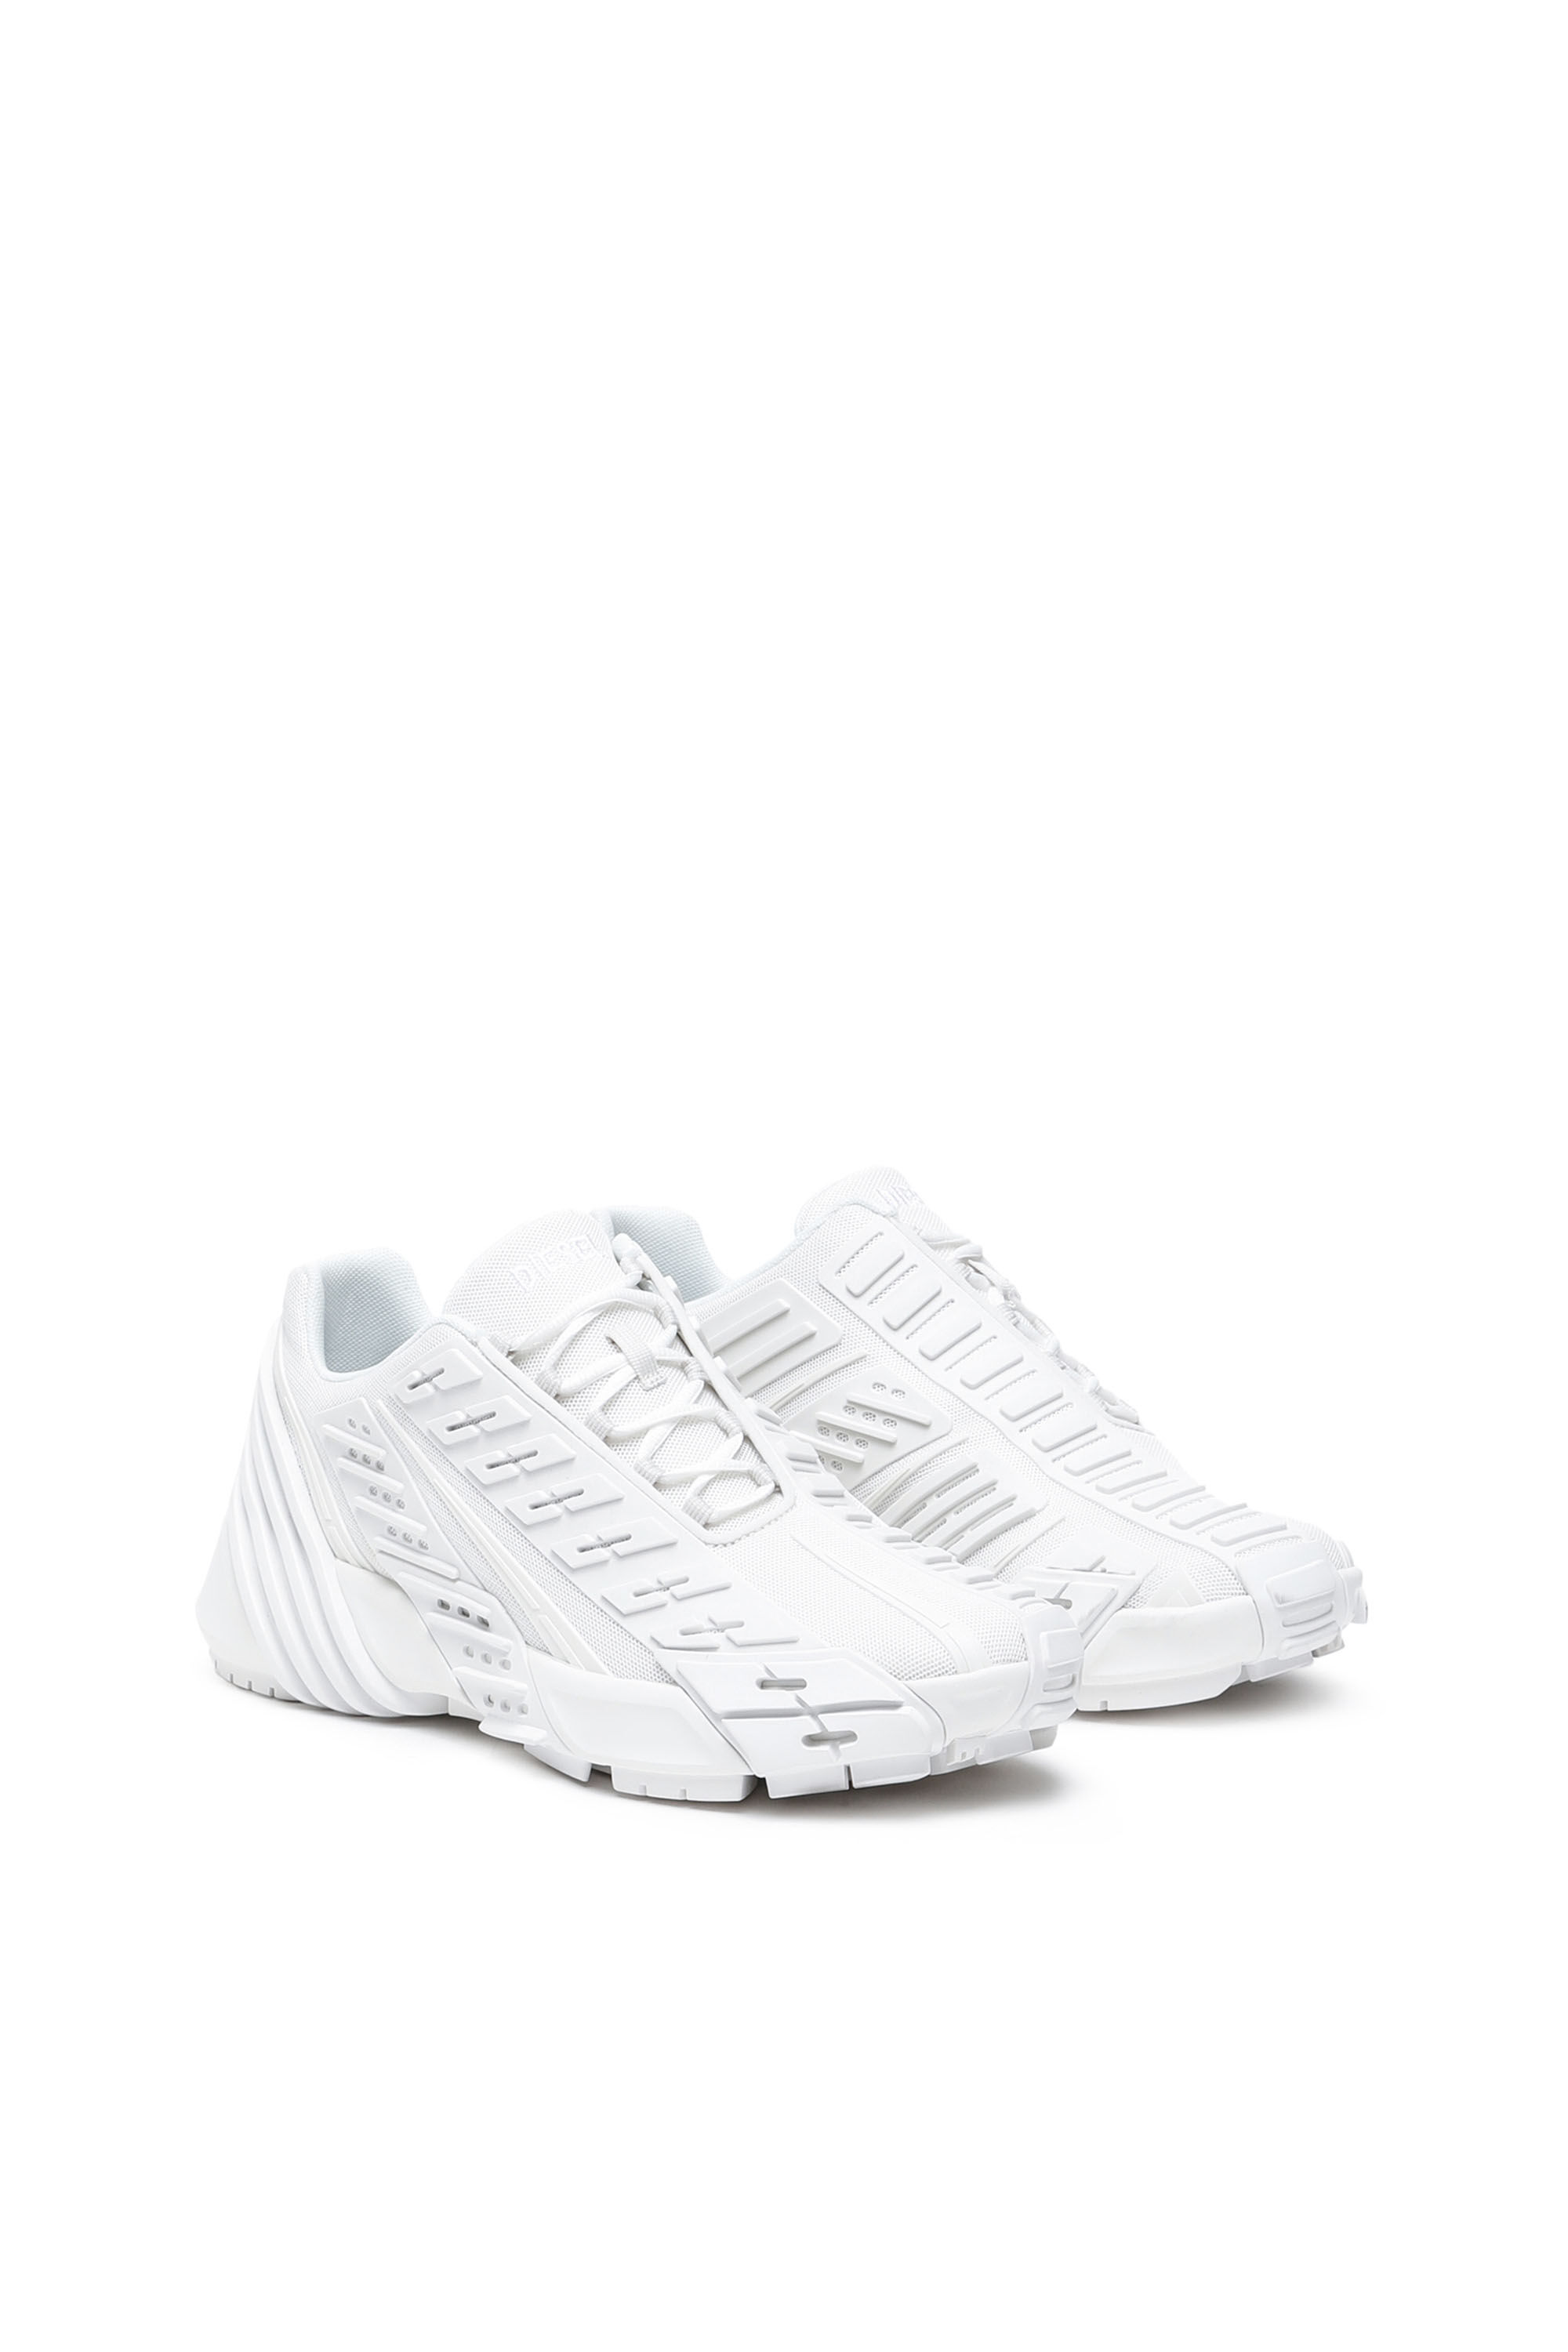 Diesel - S-PROTOTYPE LOW, Man S-Prototype Low - Sneakers in mesh and rubber in White - Image 2